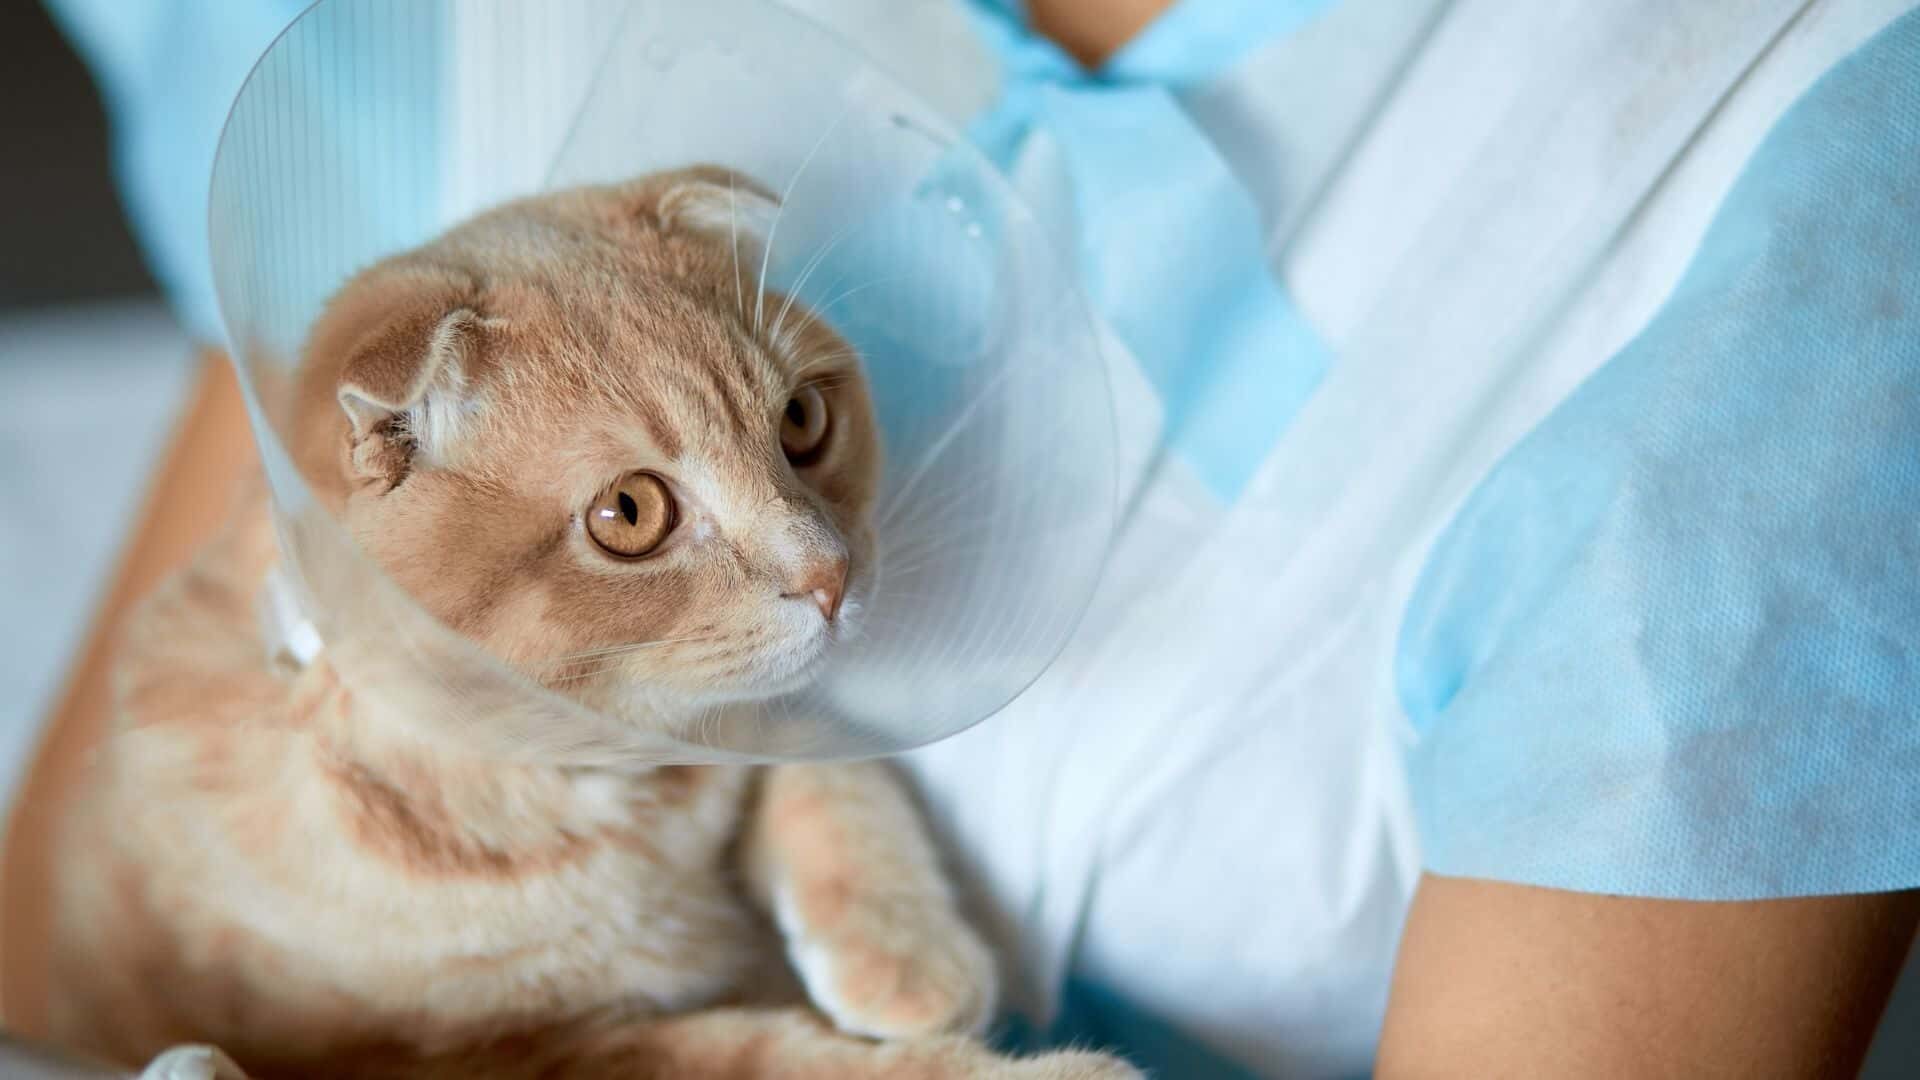 How to keep cone on cat?